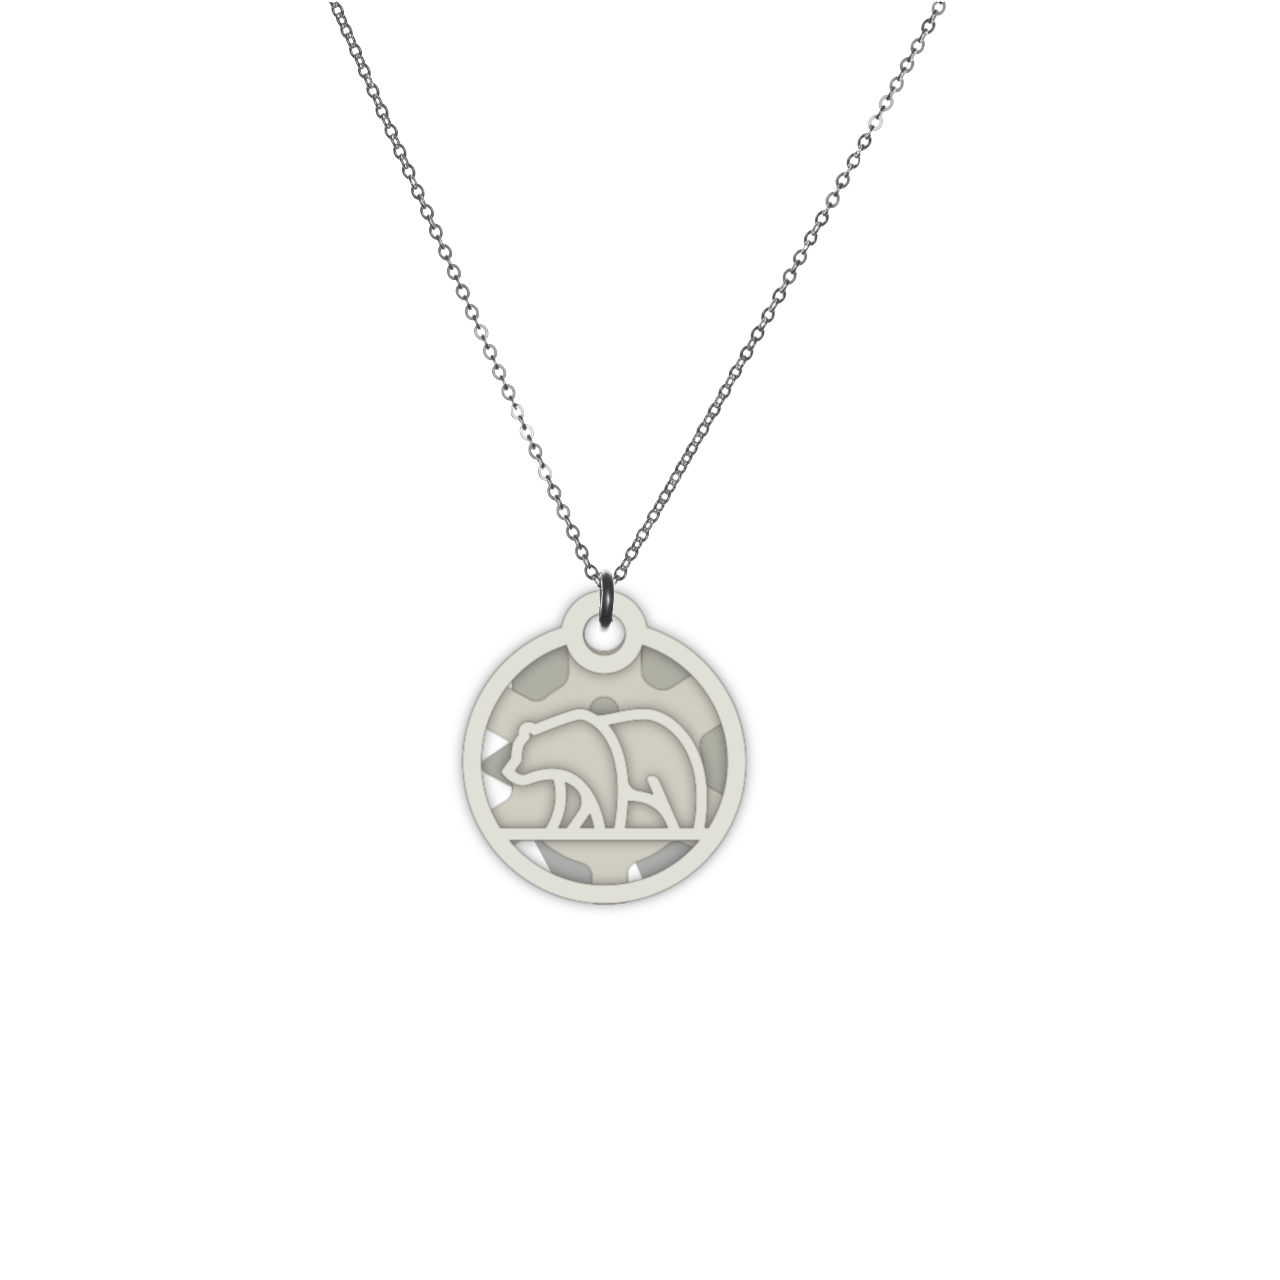 Tūlry 8-in-1 Stainless Necklace